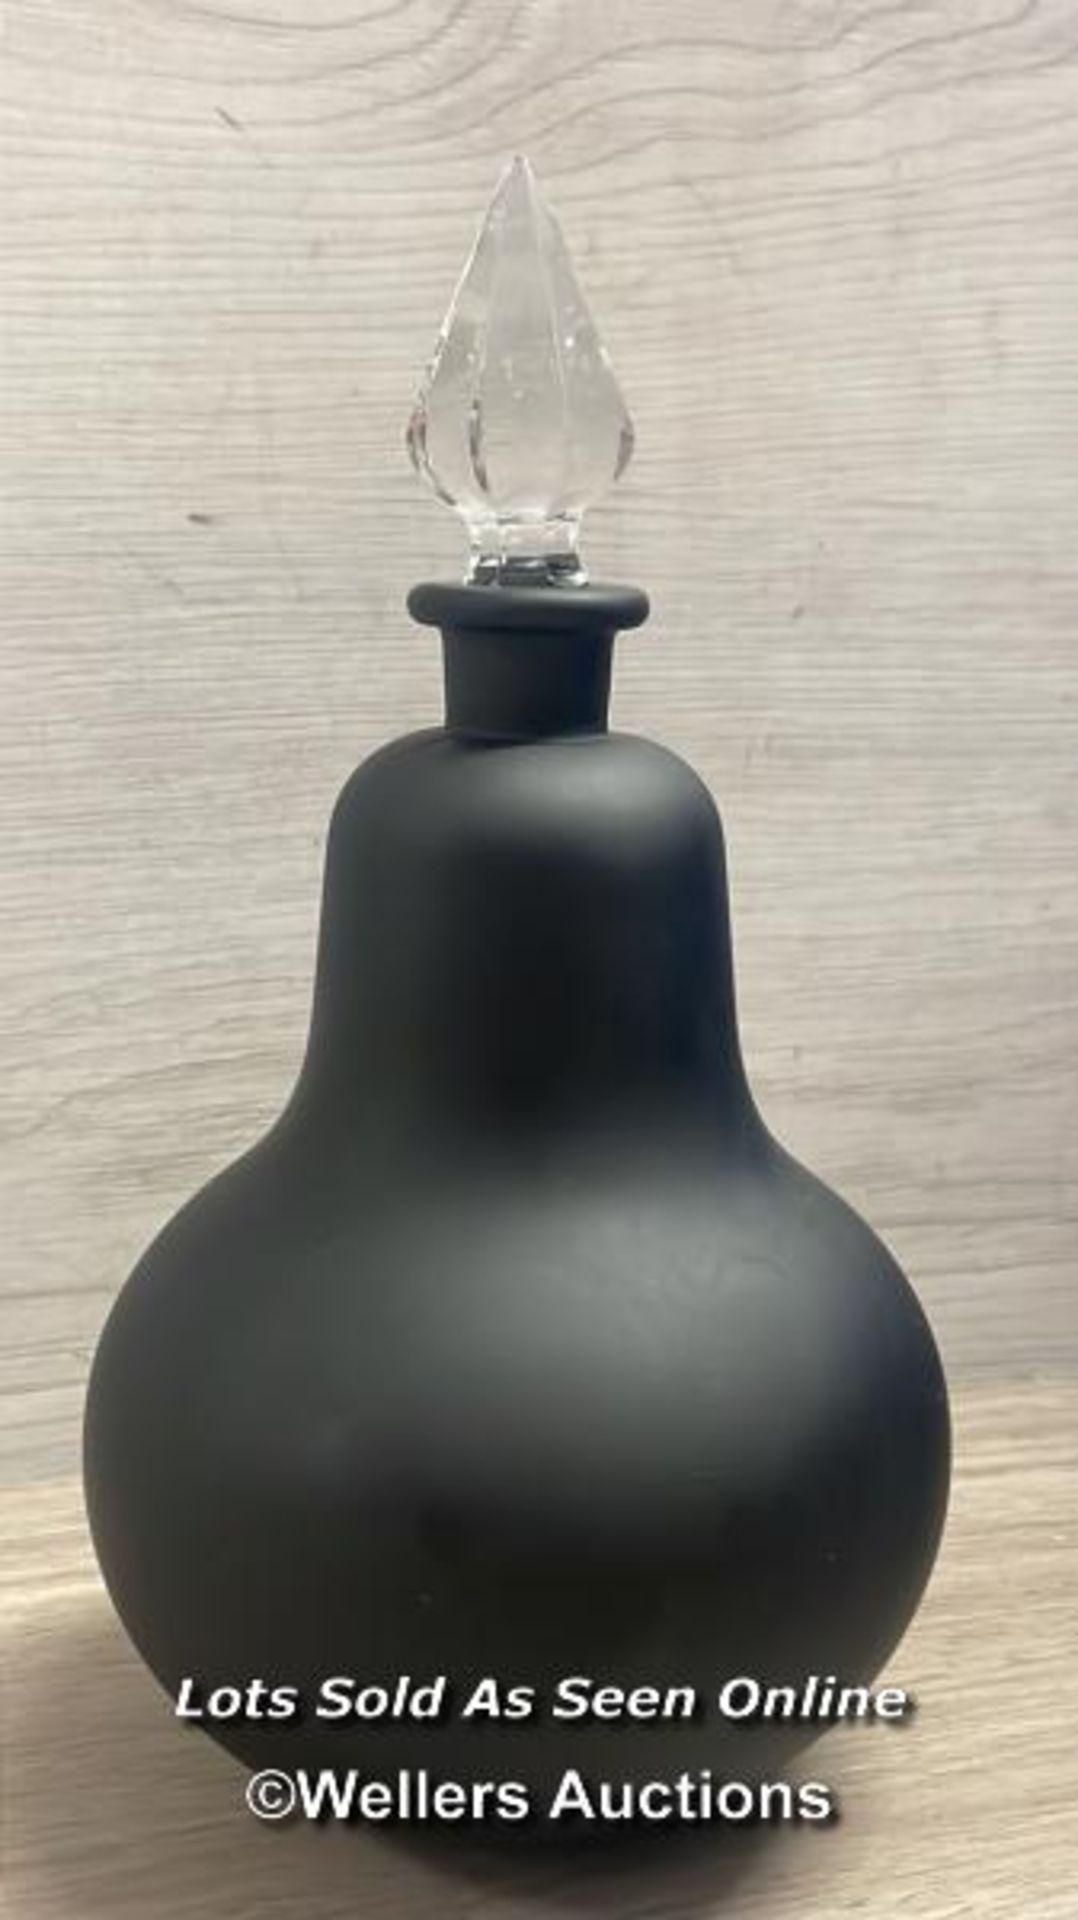 A RARE ROYAL PHARMACEUTICAL SOCIETY APOTHECARY BOTTLE, C1970S / 80'S, IN BLACK FROSTED GLASS WITH - Image 6 of 6